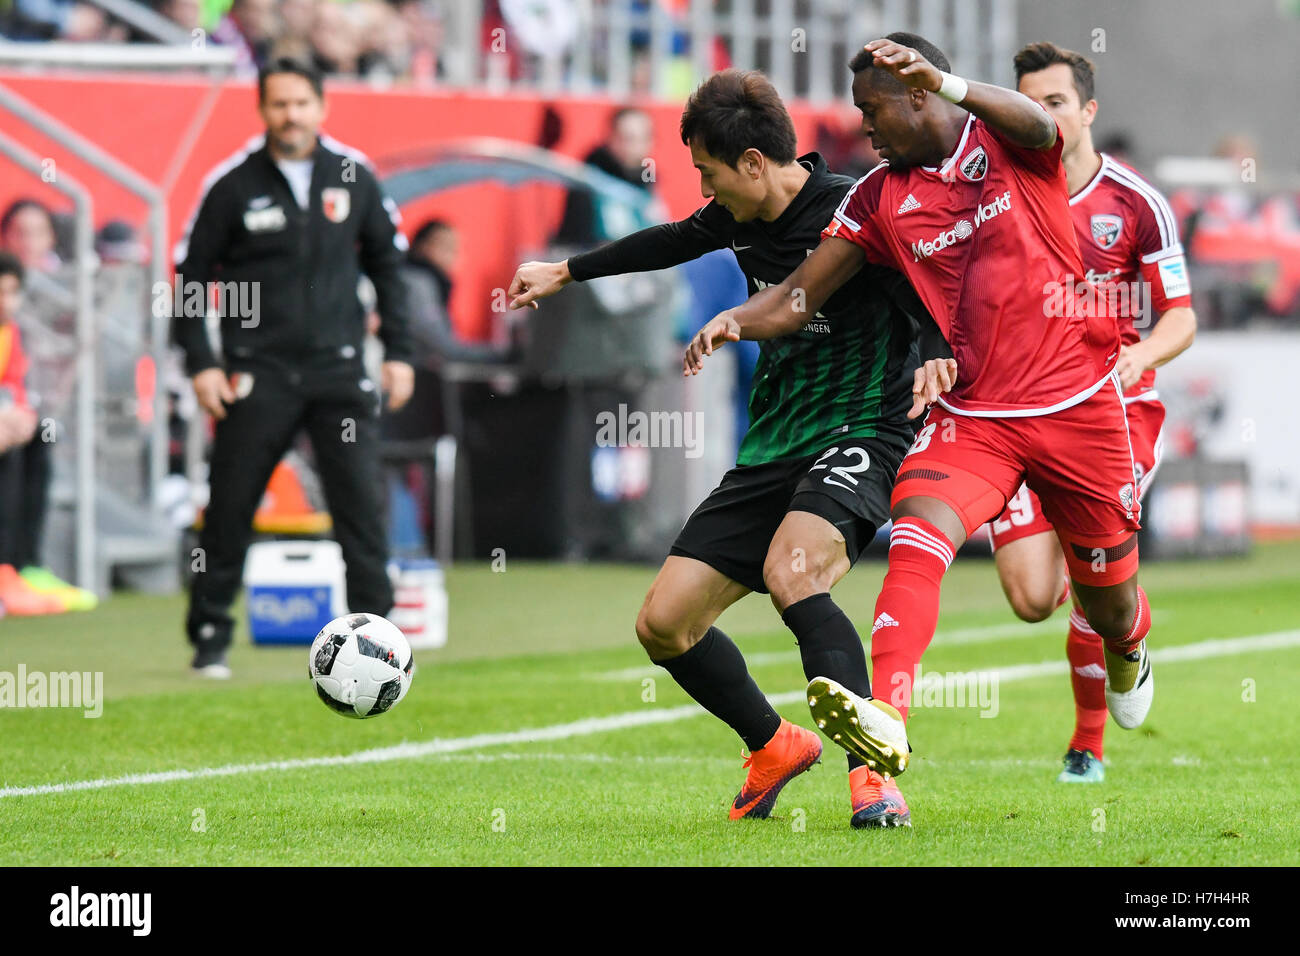 Ingolstadt, Germany. 5th Nov, 2016. Roger from Ingolstadt (r) and Dong-Won Ji from Augsburg vie for the ball during the soccer match between FC Ingolstadt o4 and FC Augsburg on the tenth match day of the Bundesliga at Audi Sportpark in Ingolstadt, Germany, 5 November 2016. PHOTO: ARMIN WEIGEL/dpa (ATTENTION: Due to the accreditation guidelines, the DFL only permits the publication and utilisation of up to 15 pictures per match on the internet and in online media during the match.) Credit:  dpa/Alamy Live News Stock Photo